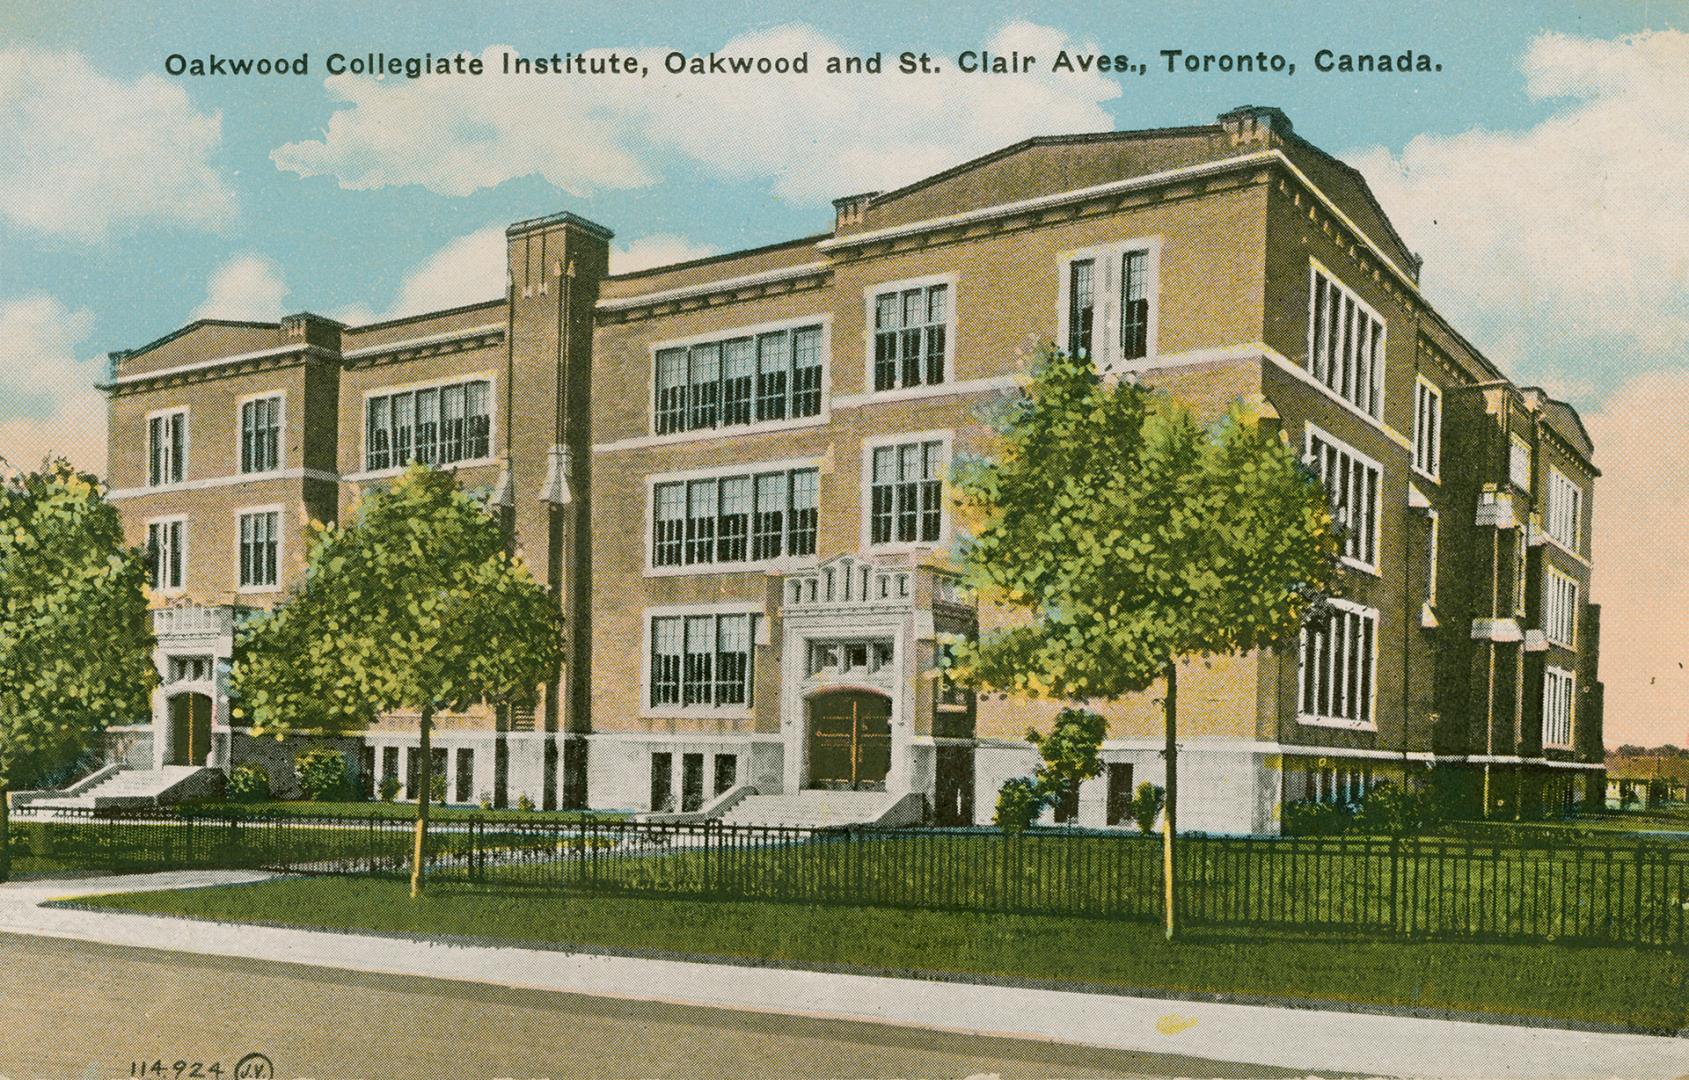 Colorized photograph of a three story collegiate building.